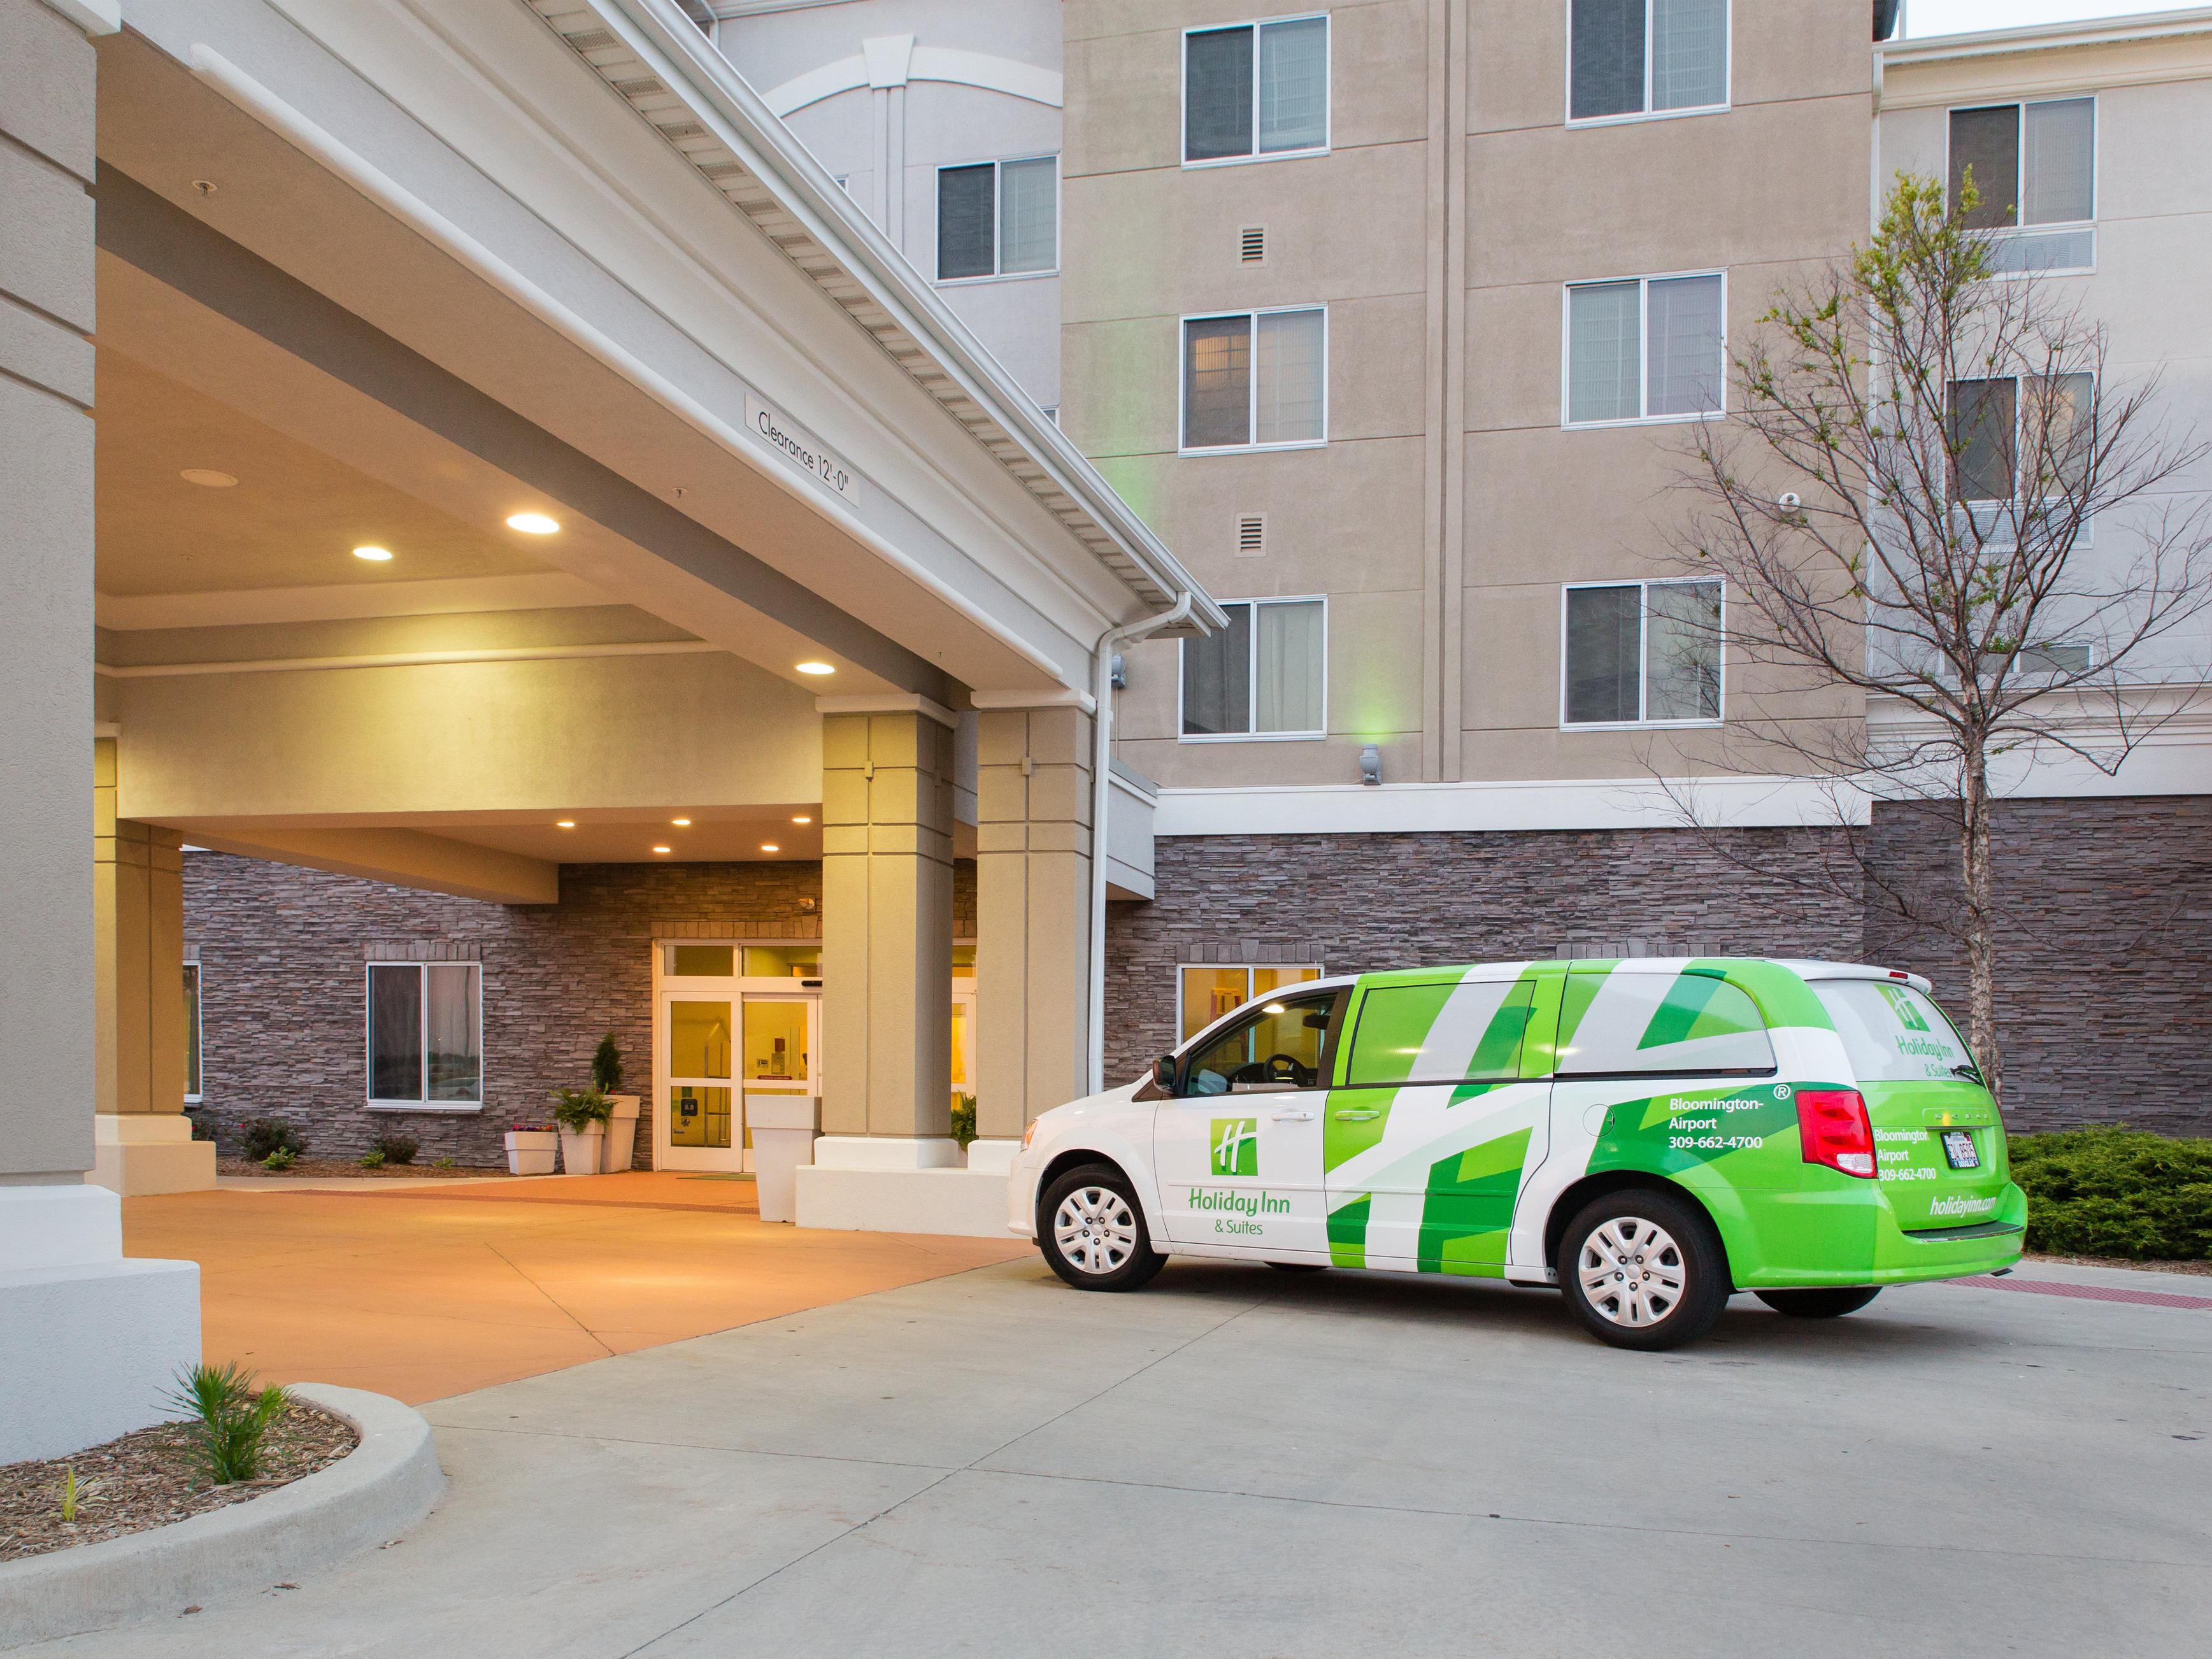 Complimentary shuttle service to and from Central Illinois Regional Airport, as well as additional locations within a 5 mile radius of the hotel.  Shuttle service is just a phone call away and is available 24 hours per day, upon availability.  Contact the hotel directly to request a ride!